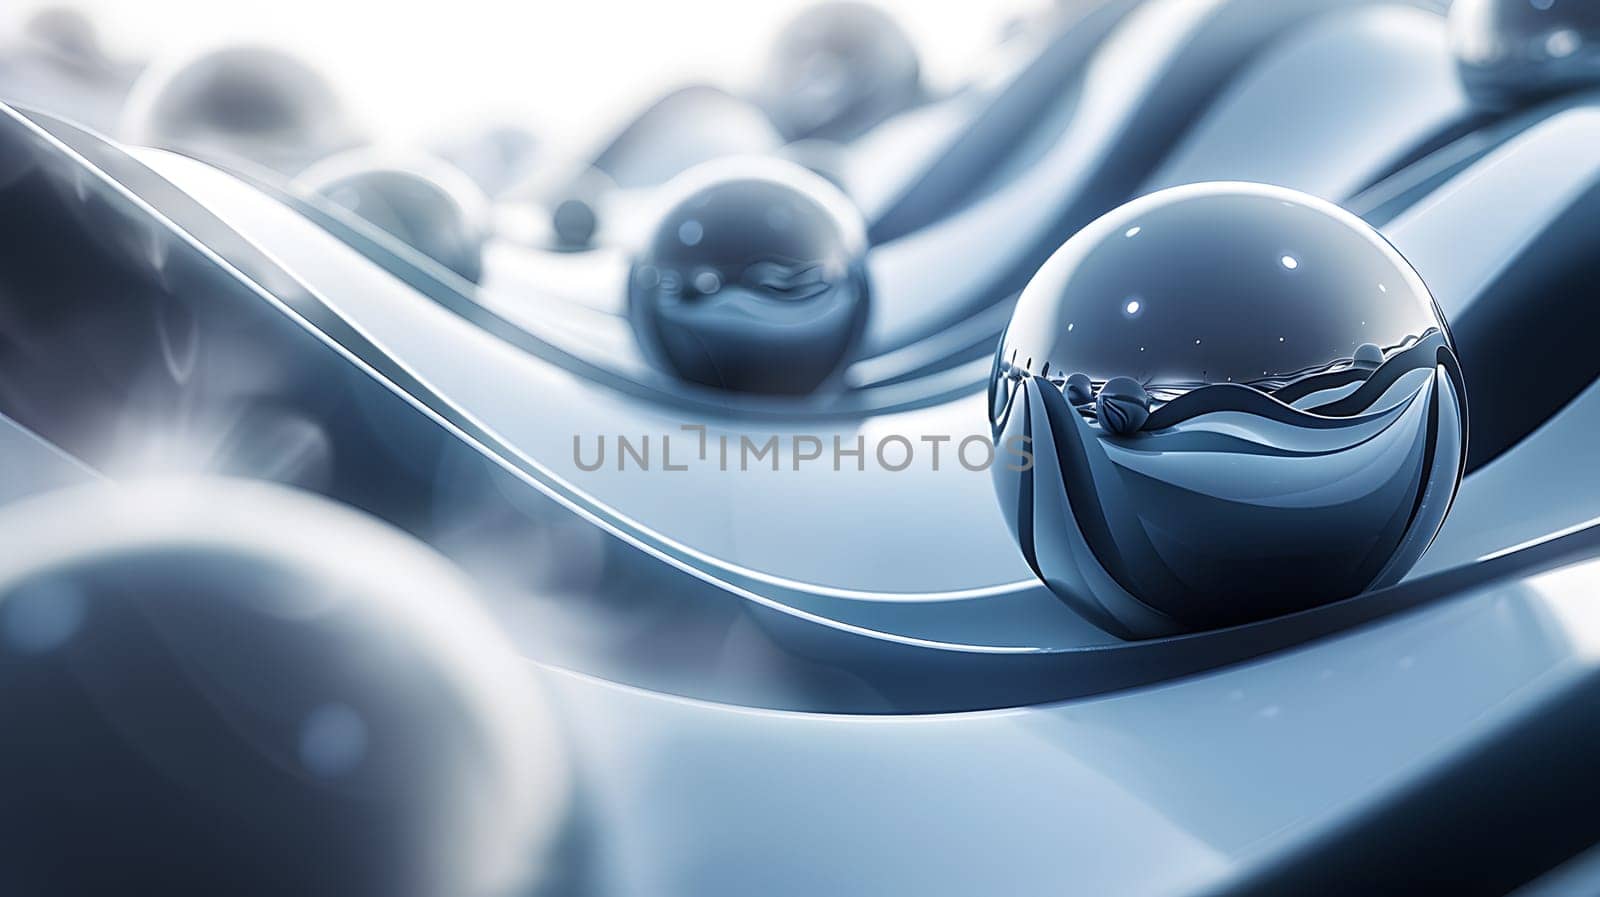 Closeup view of metallic balls on a shiny surface by Nadtochiy